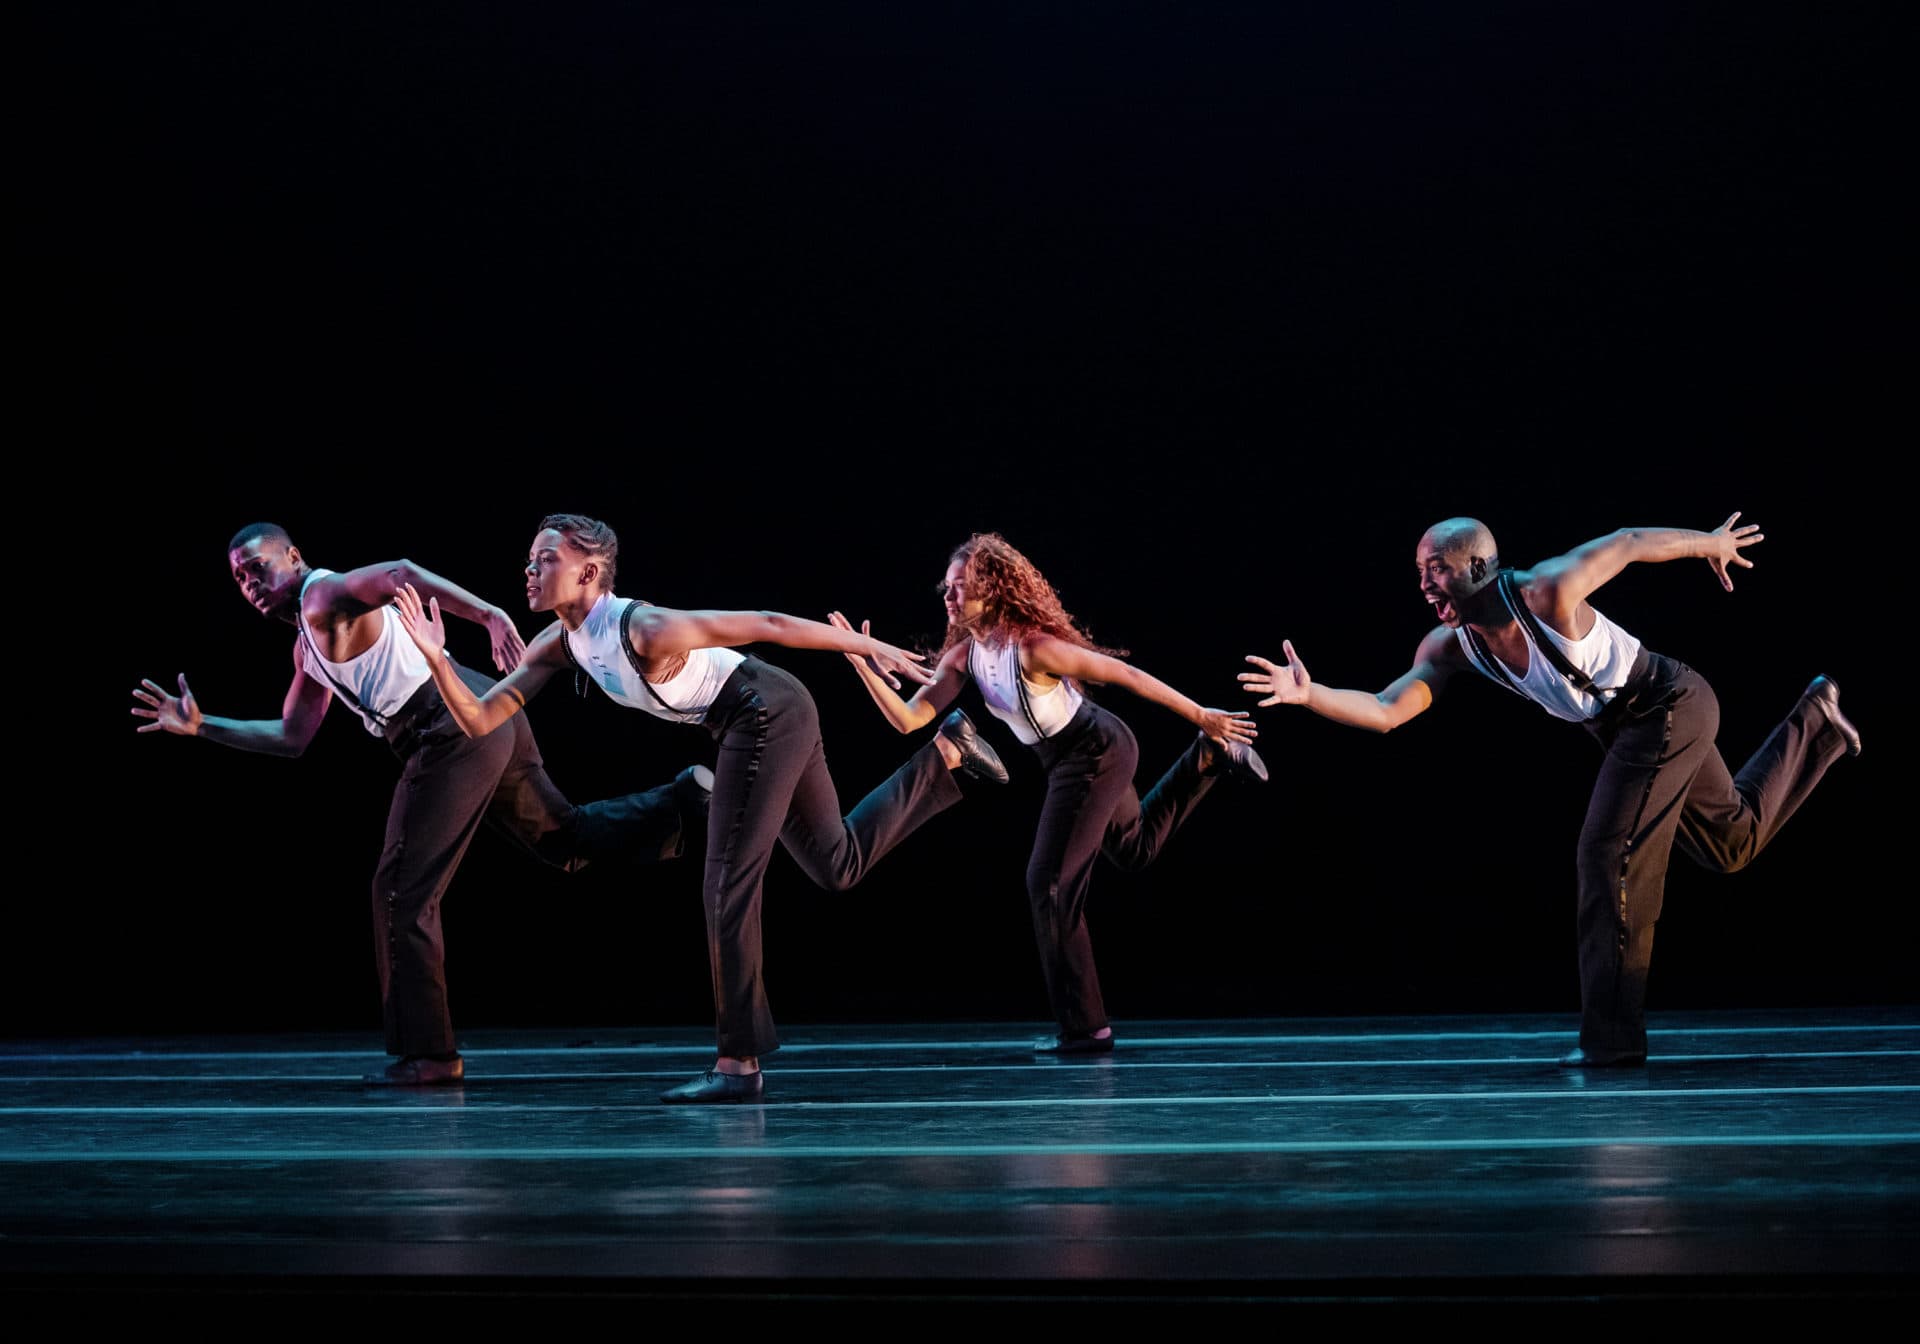 Ailey's Solomon Dumas, Samantha Figgins, Belén Indhira Pereyra and Renaldo Maurice in Robert Battle's For Four, stage premiere. (Courtesy Paul Kolnik)